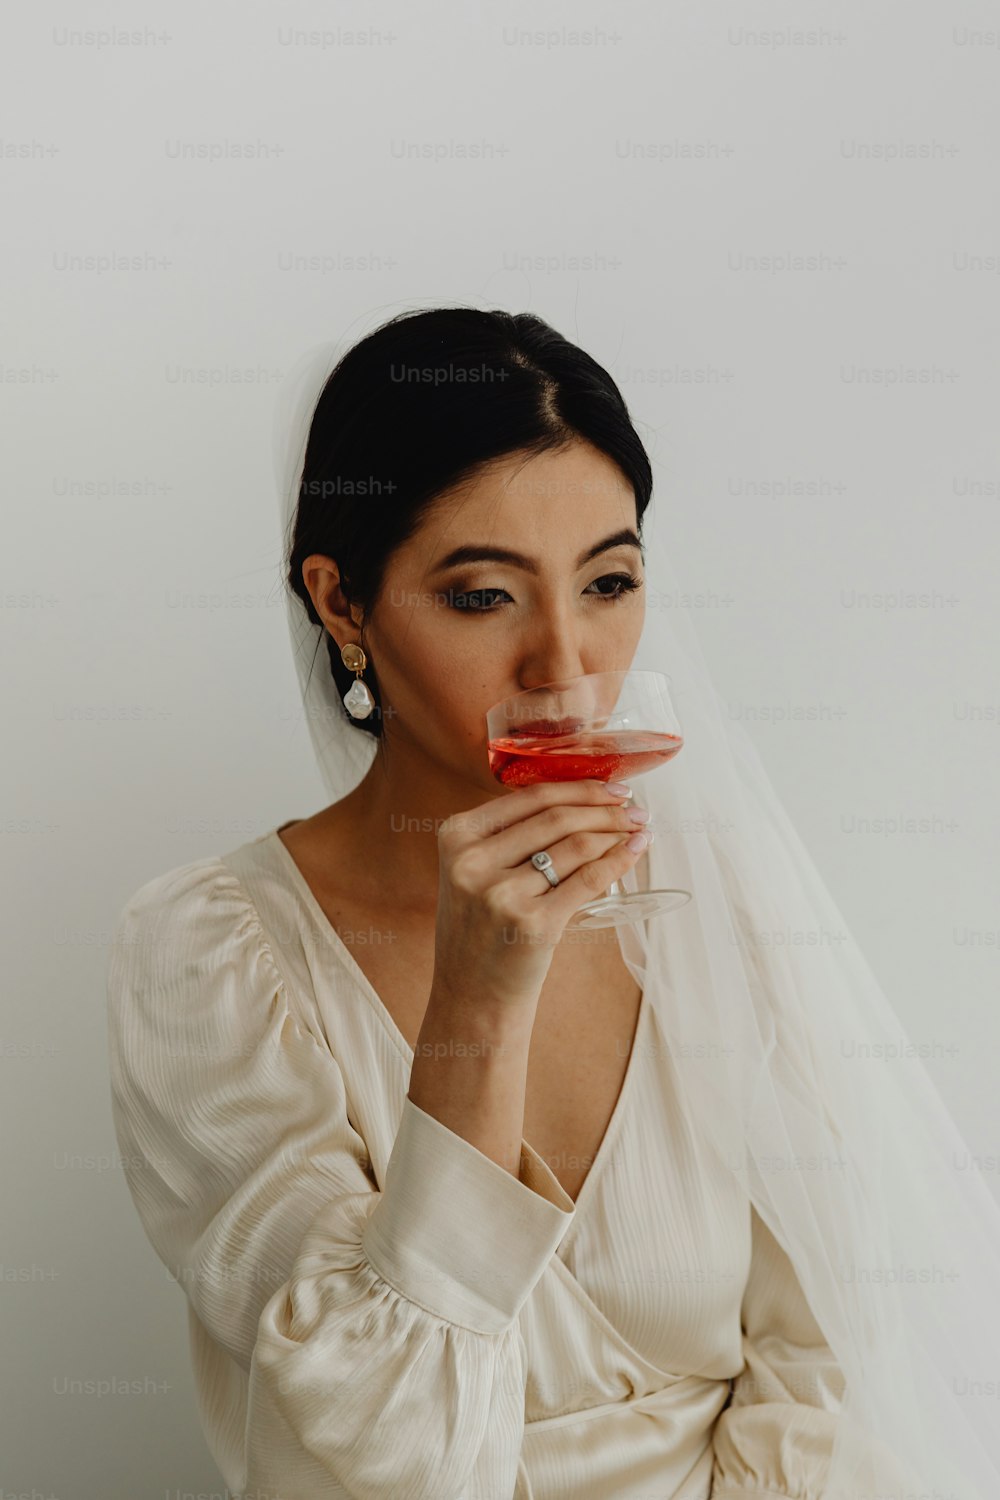 a woman in a wedding dress holding a glass of wine